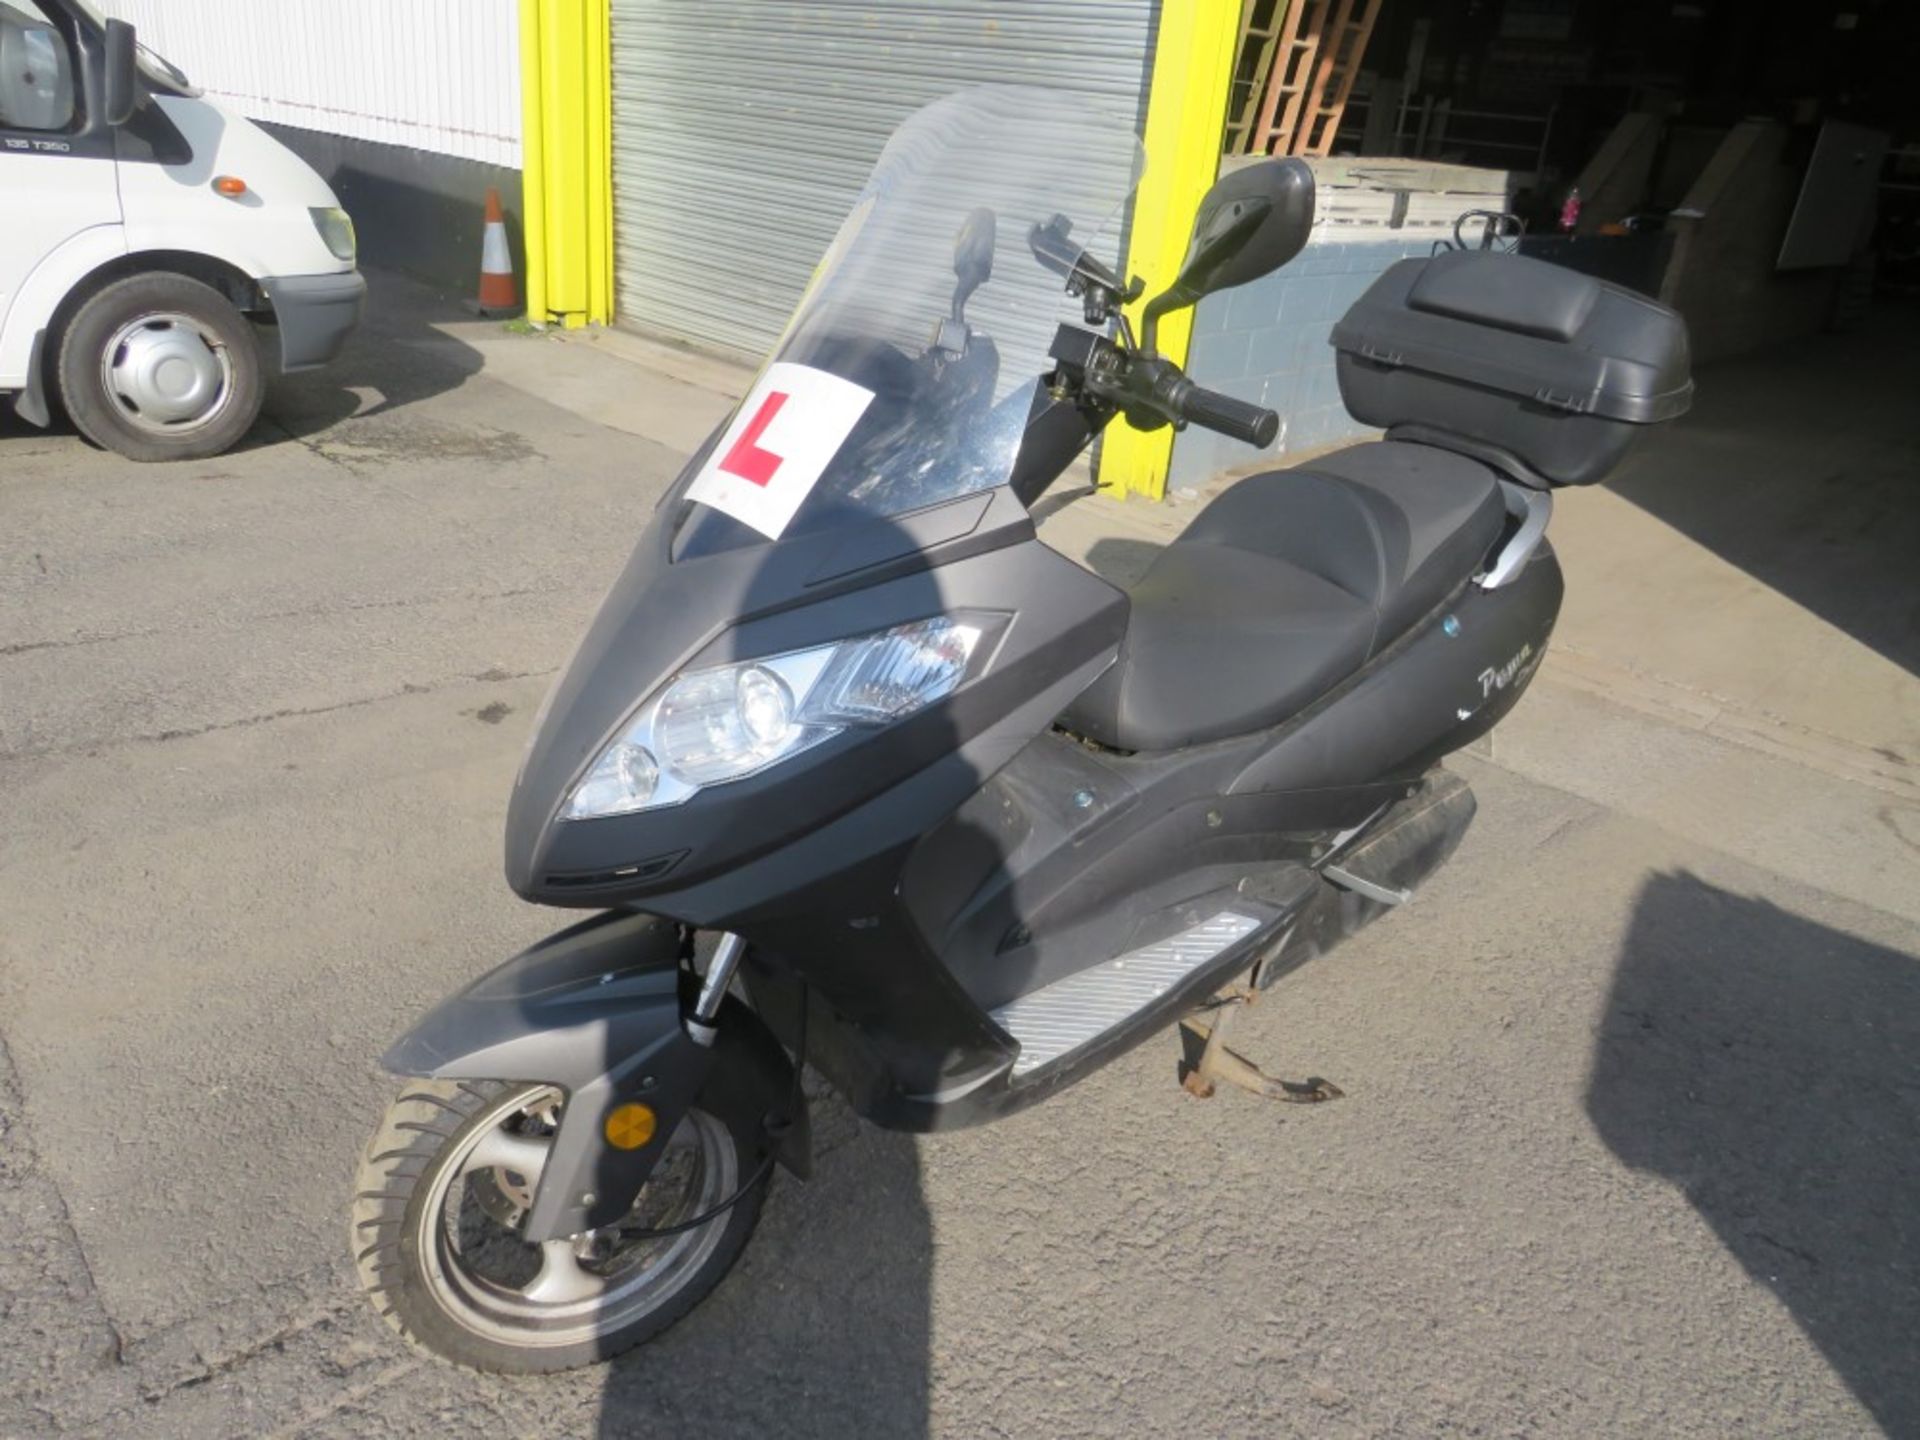 20 reg EFUN PUMA ELECTRIC SCOOTER, 1ST REG 07/20, 4247M, V5 HERE, 1 OWNER FROM NEW [NO VAT] - Image 2 of 5